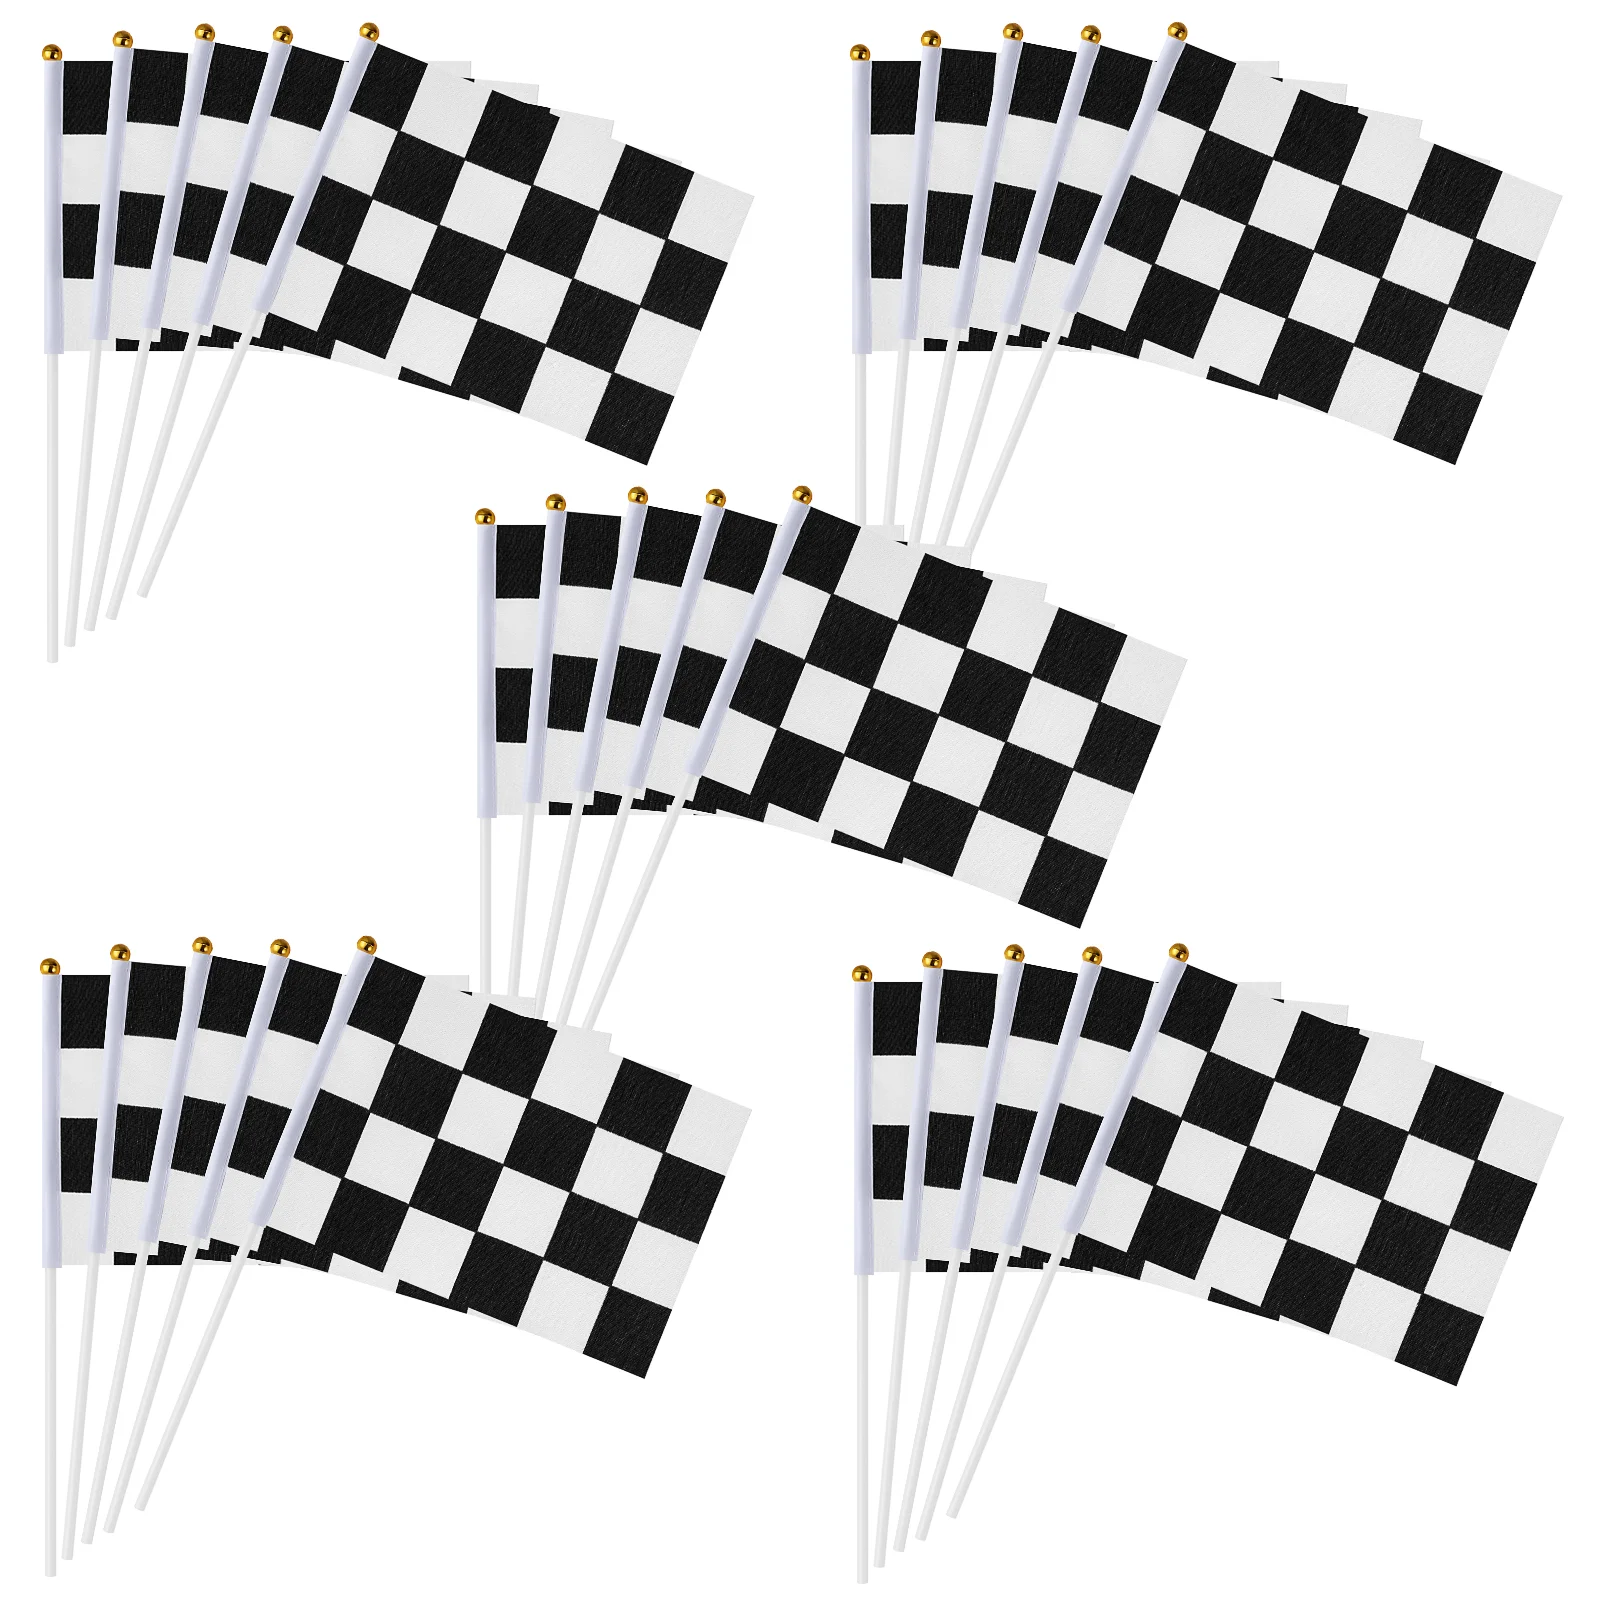 

Flags Racing Checkered Party Flag Car Race Decorations Supplies Birthday Black White Sticks Stick Cars A Kids Decoration Theme